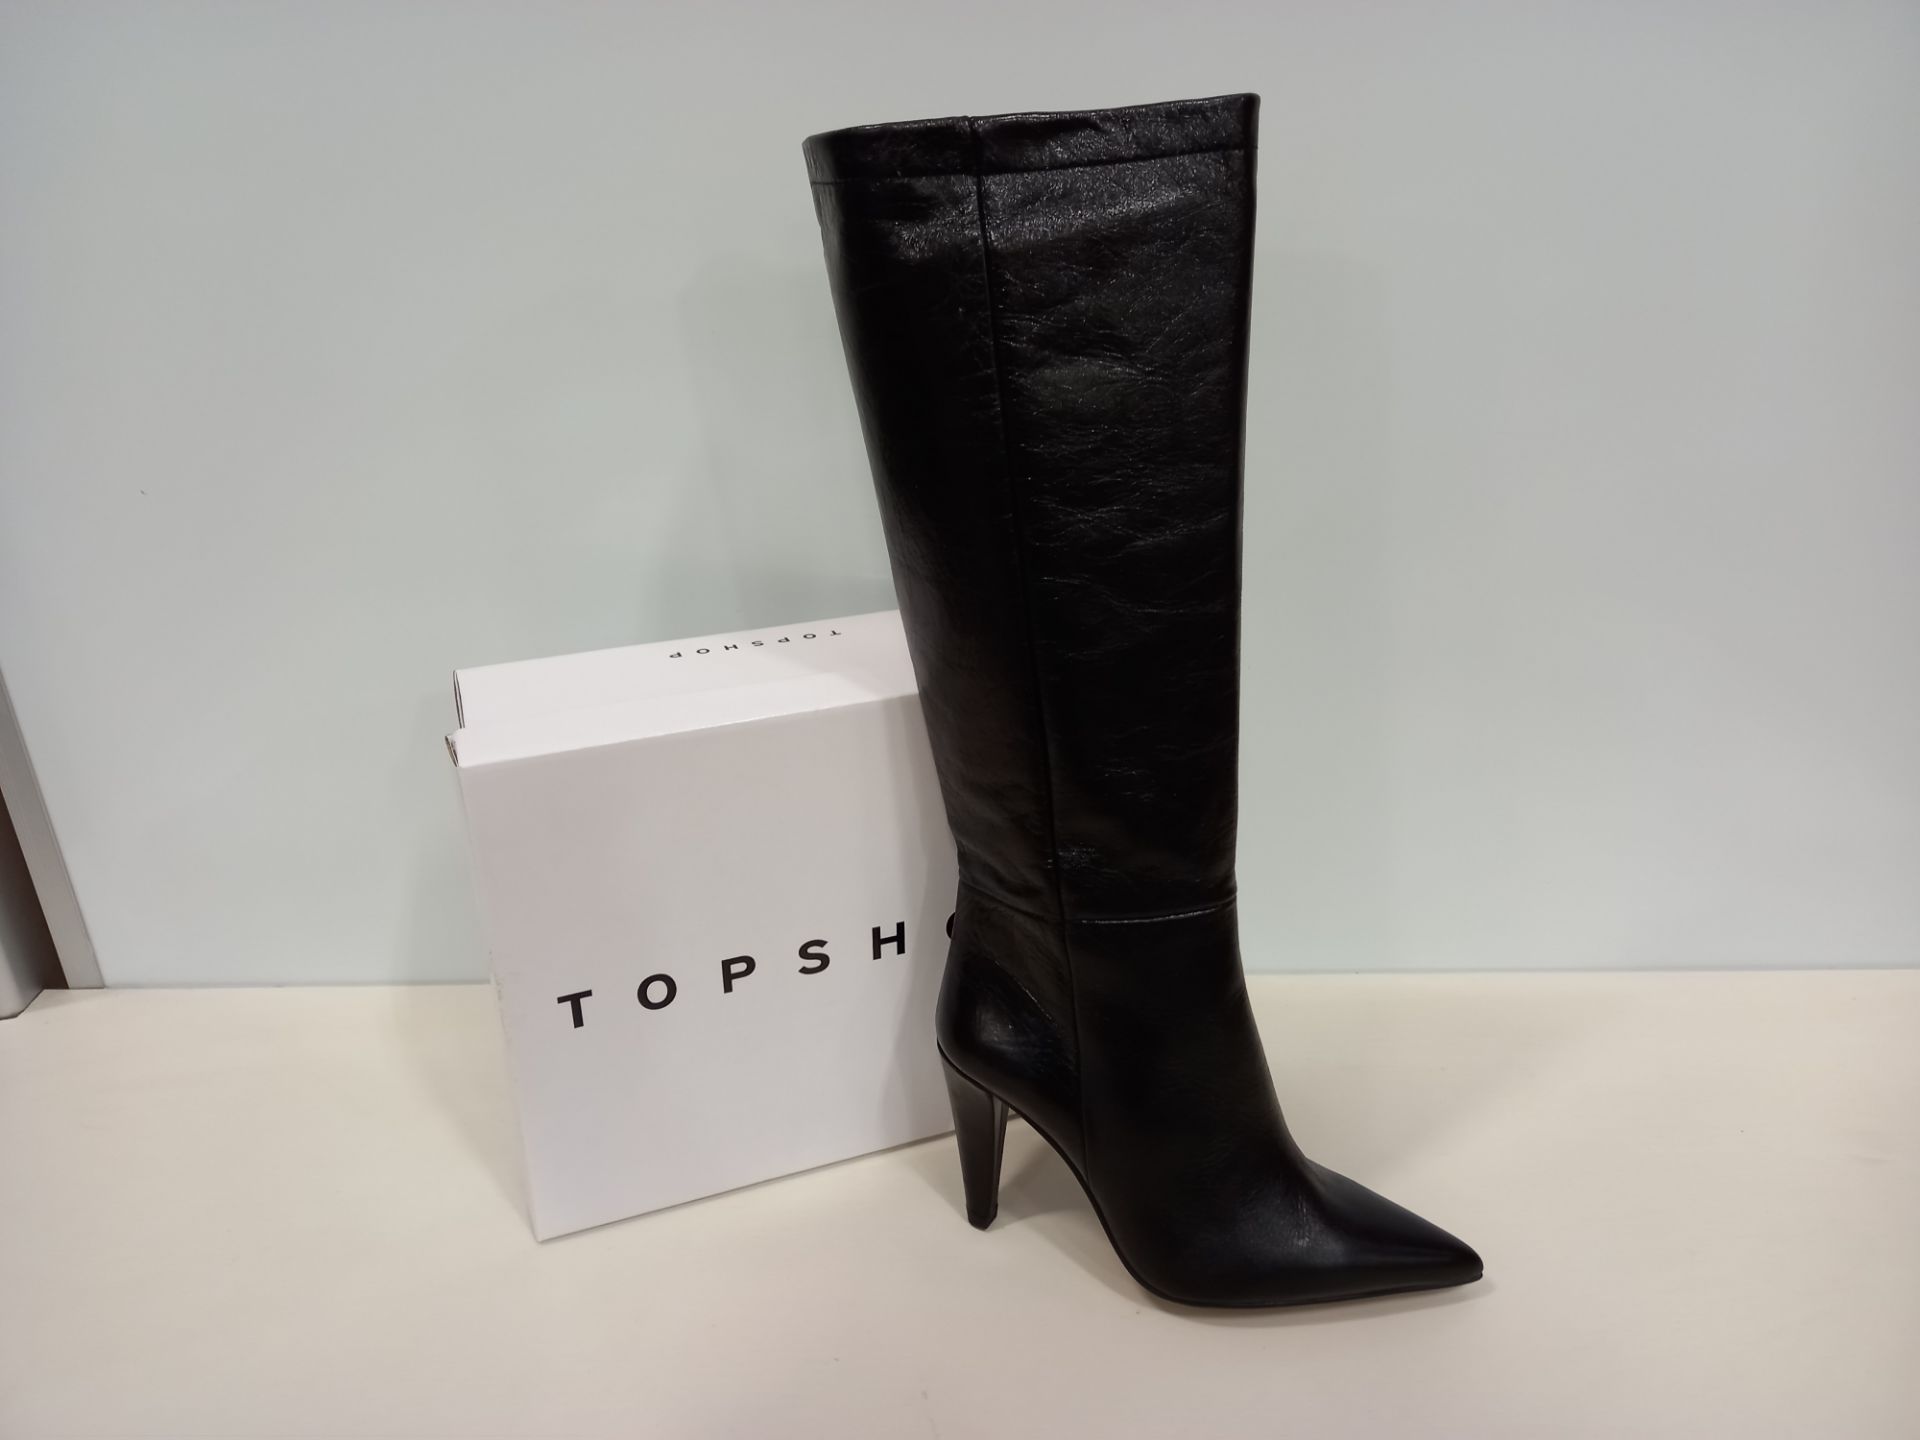 5 X BRAND NEW TOPSHOP TAYLOR BLACK SHOES UK SIZE 4 RRP £120.00 (TOTAL RRP £600.00)